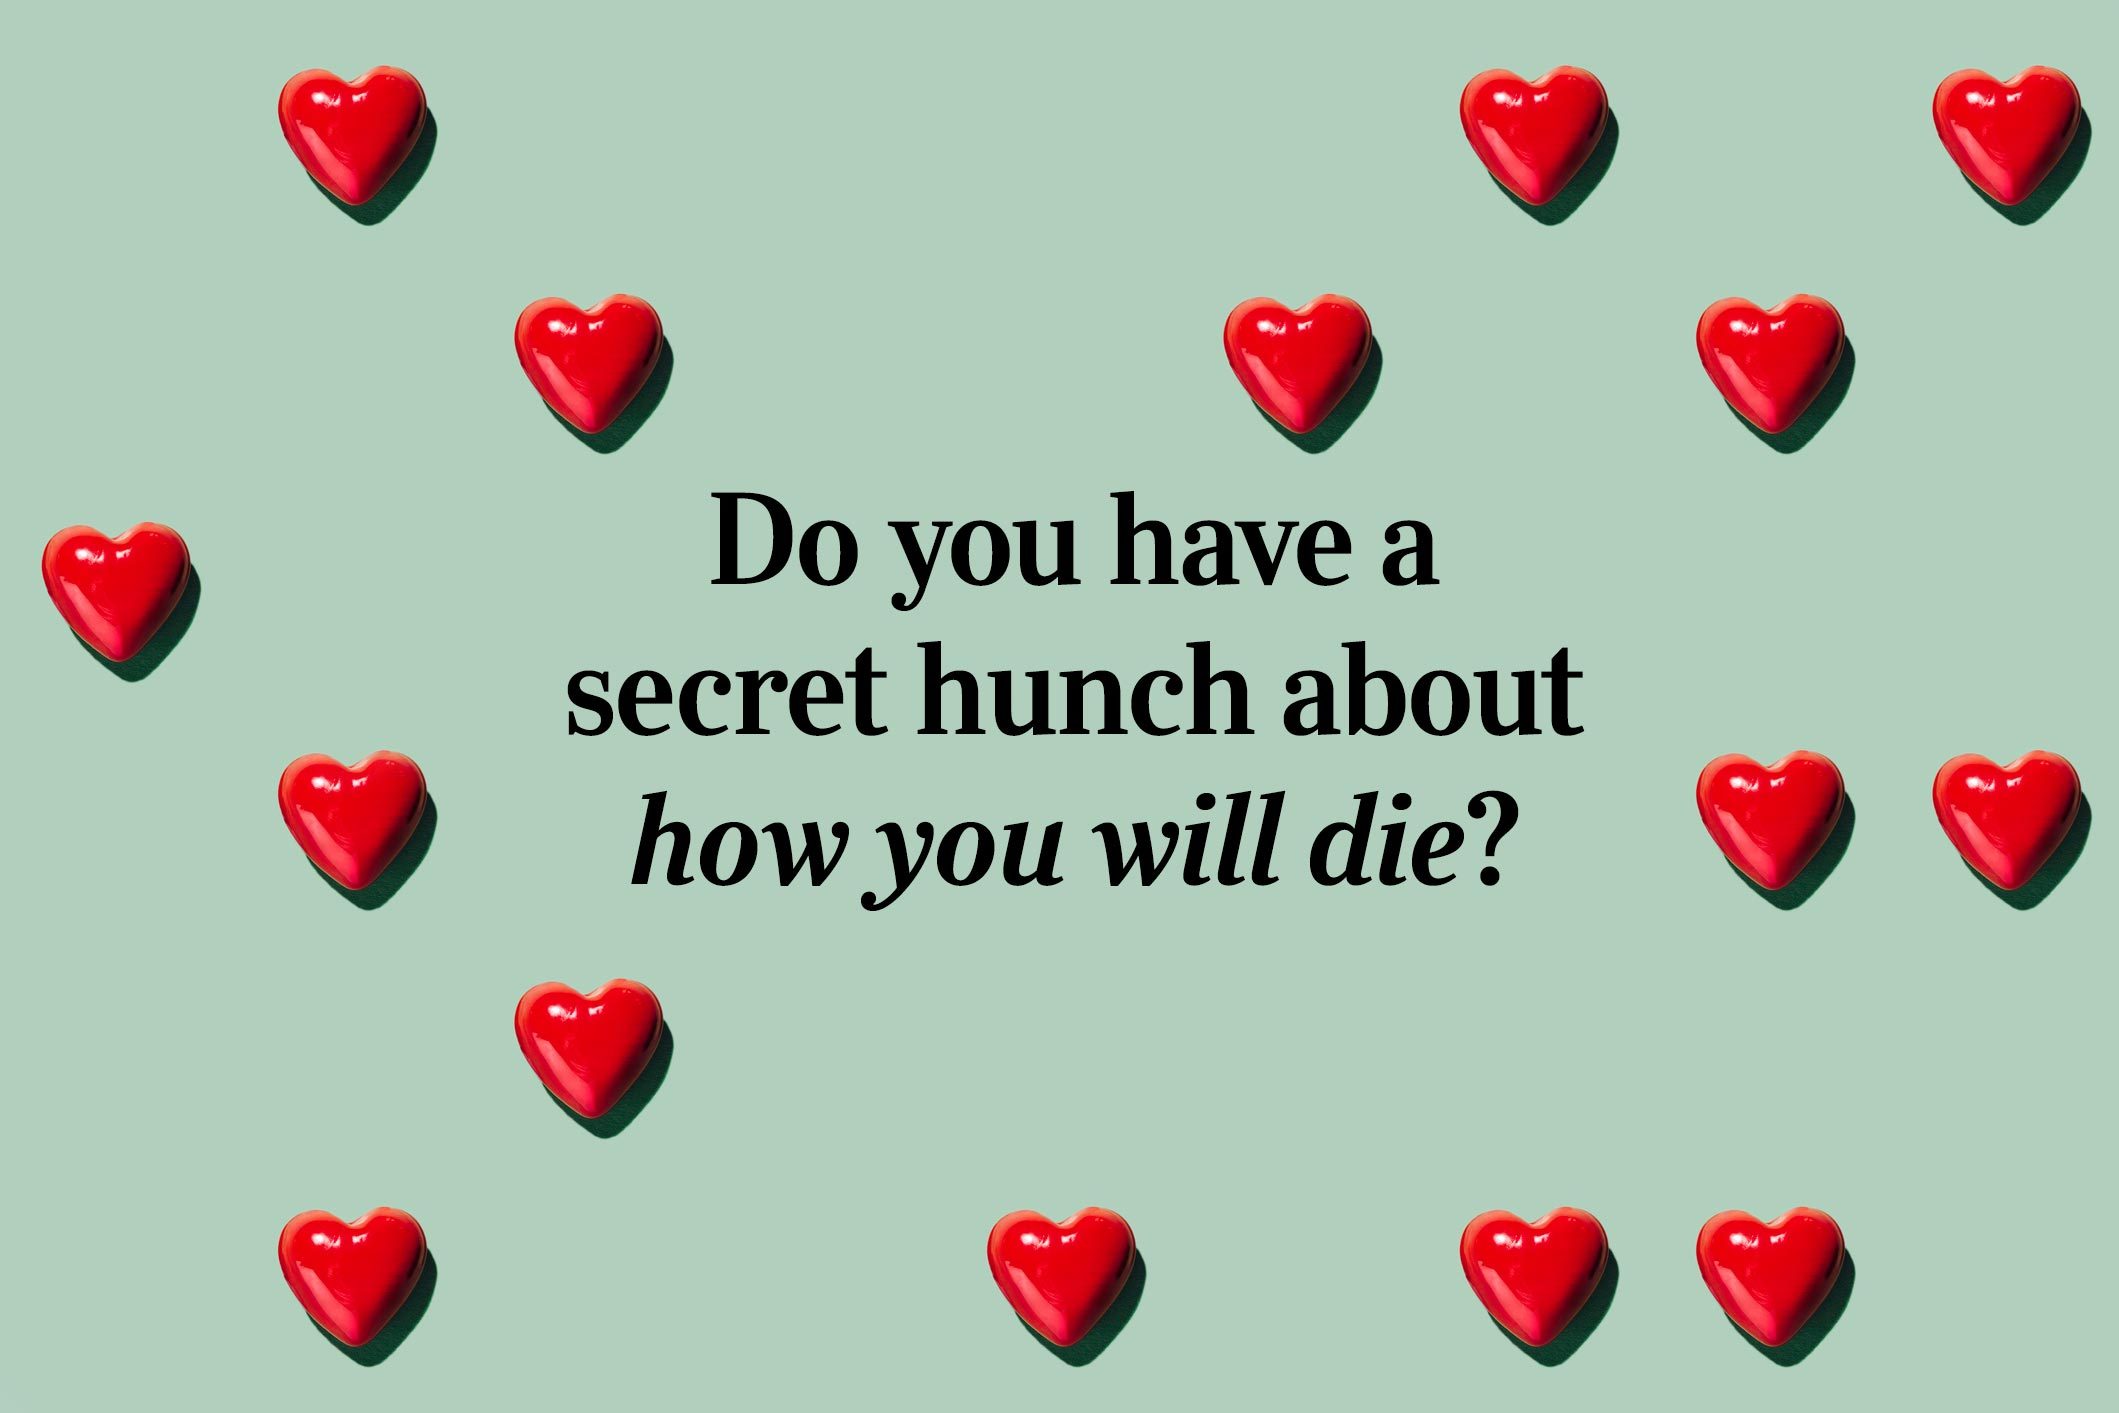 <p>It may surprise you that this question can lead to love: Do you have a secret hunch about how you will die?</p> <p>It's an <a href="https://www.rd.com/list/interesting-facts/">interesting fact</a> about the person you're talking to, to say the least.</p>